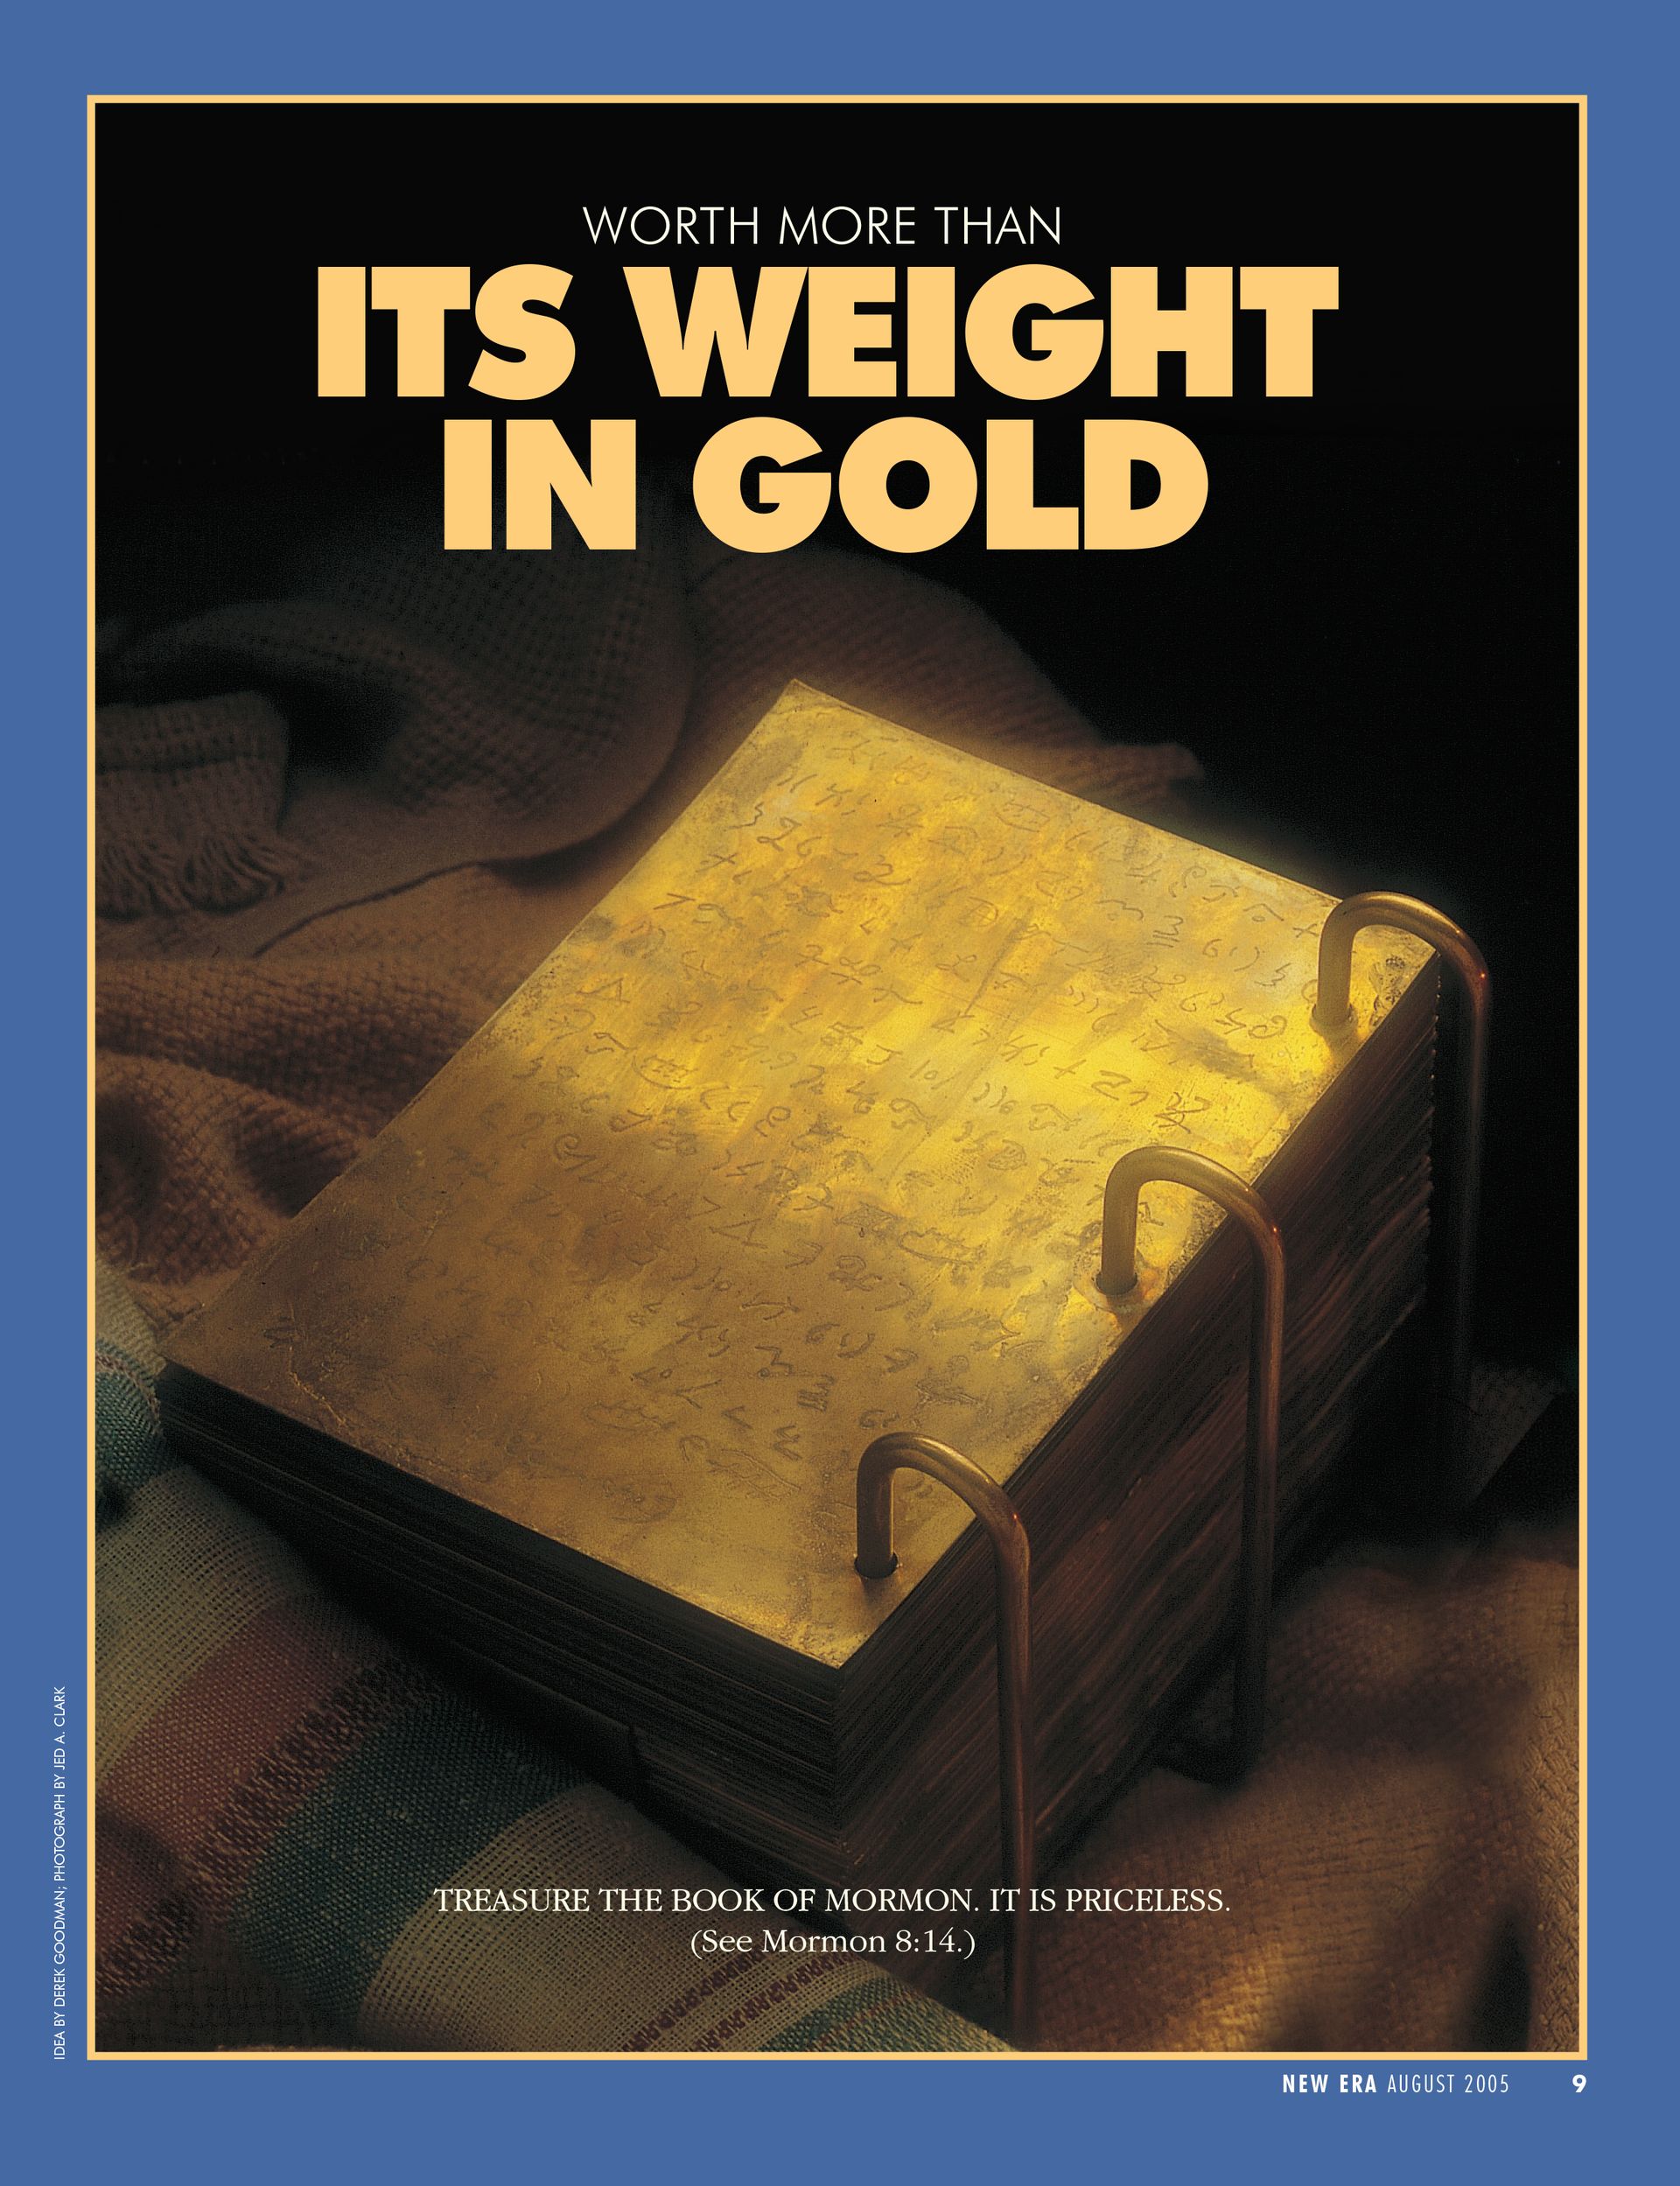 Worth More Than Its Weight in Gold. Treasure the Book of Mormon. It is priceless. (See Mormon 8:14.) Aug. 2005 © undefined ipCode 1.